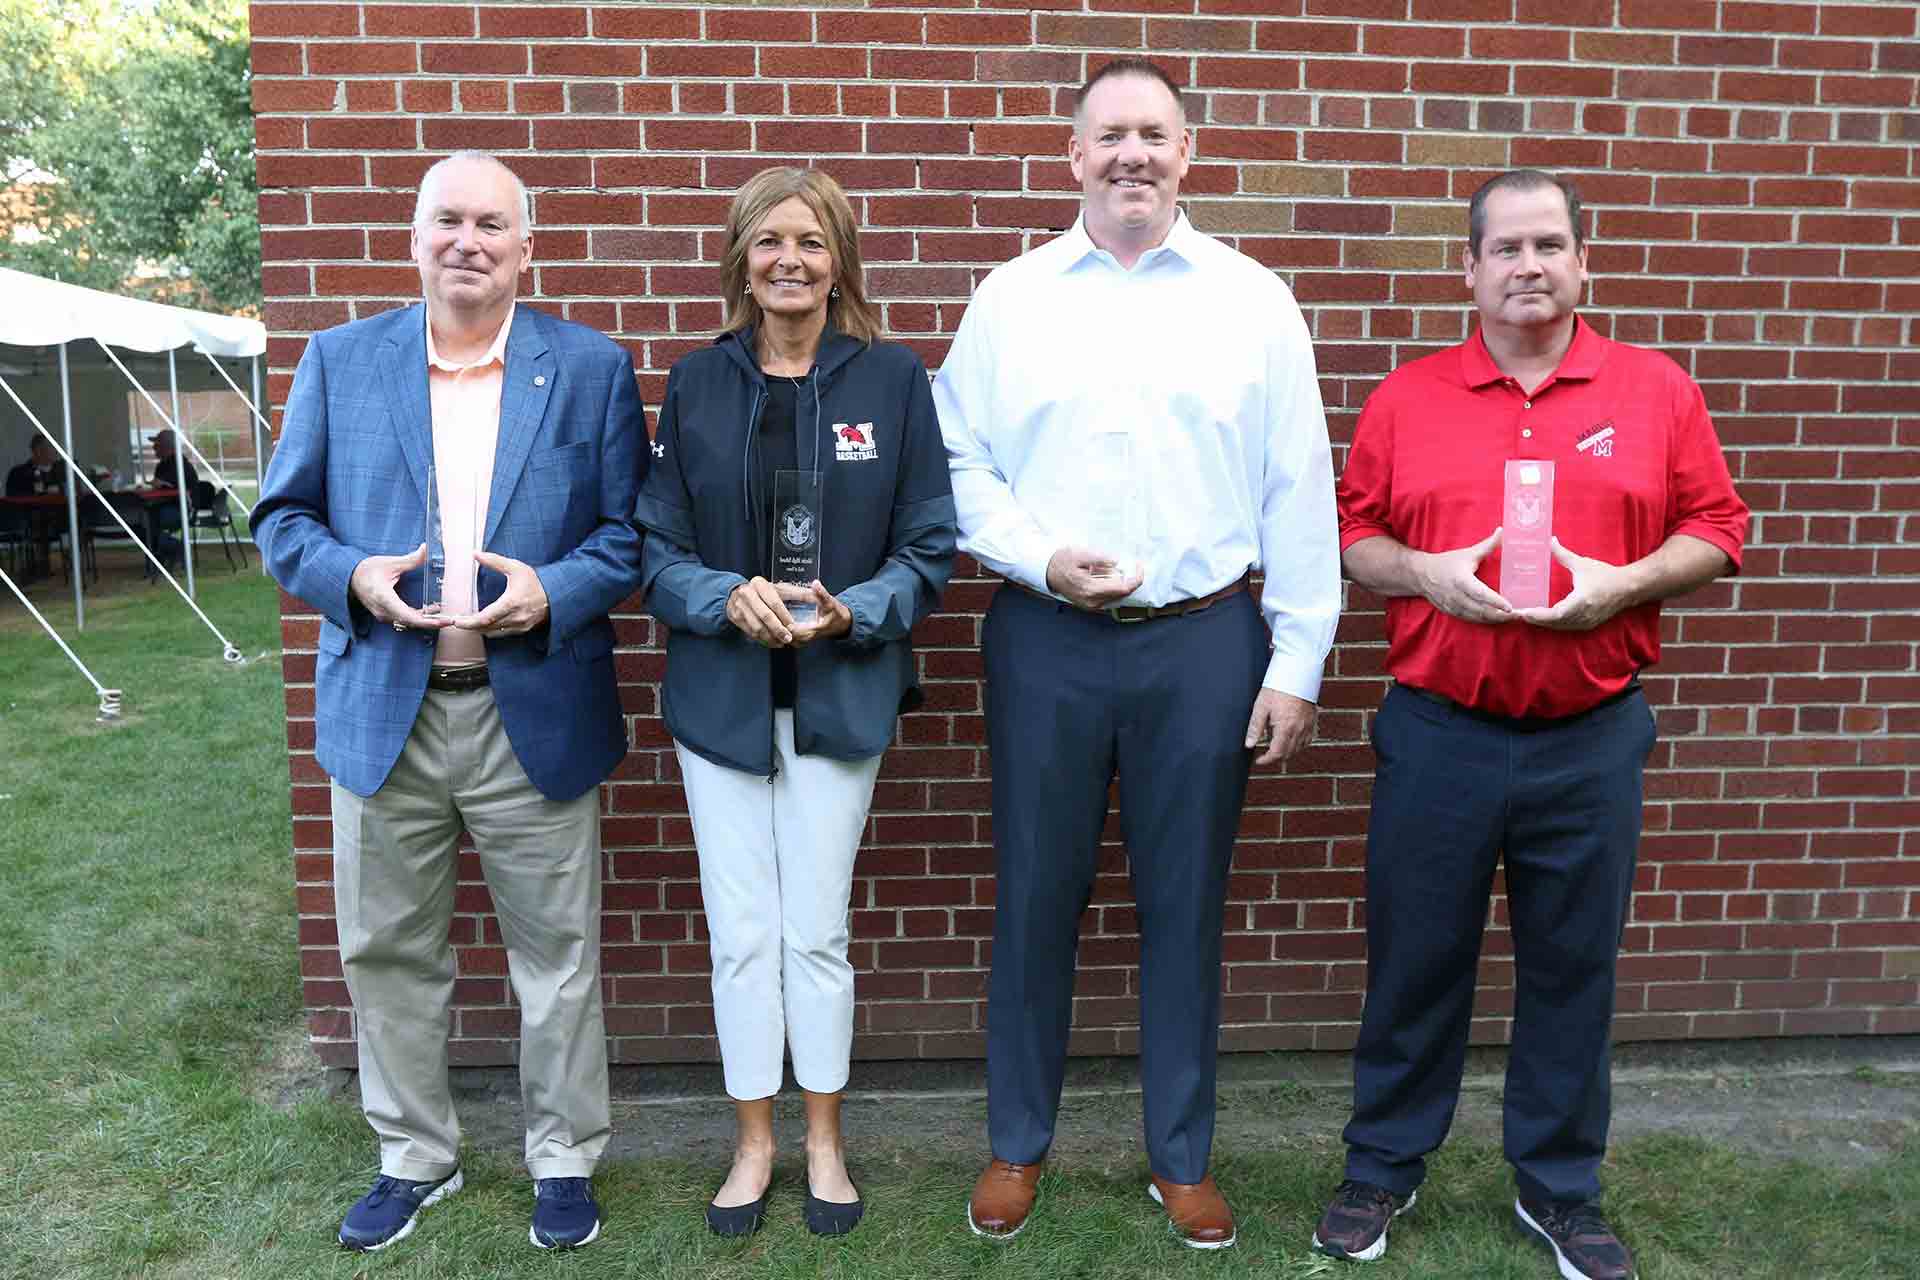 2021-hall-of-fame-ceremony-four-honorees-smiling-with-awards